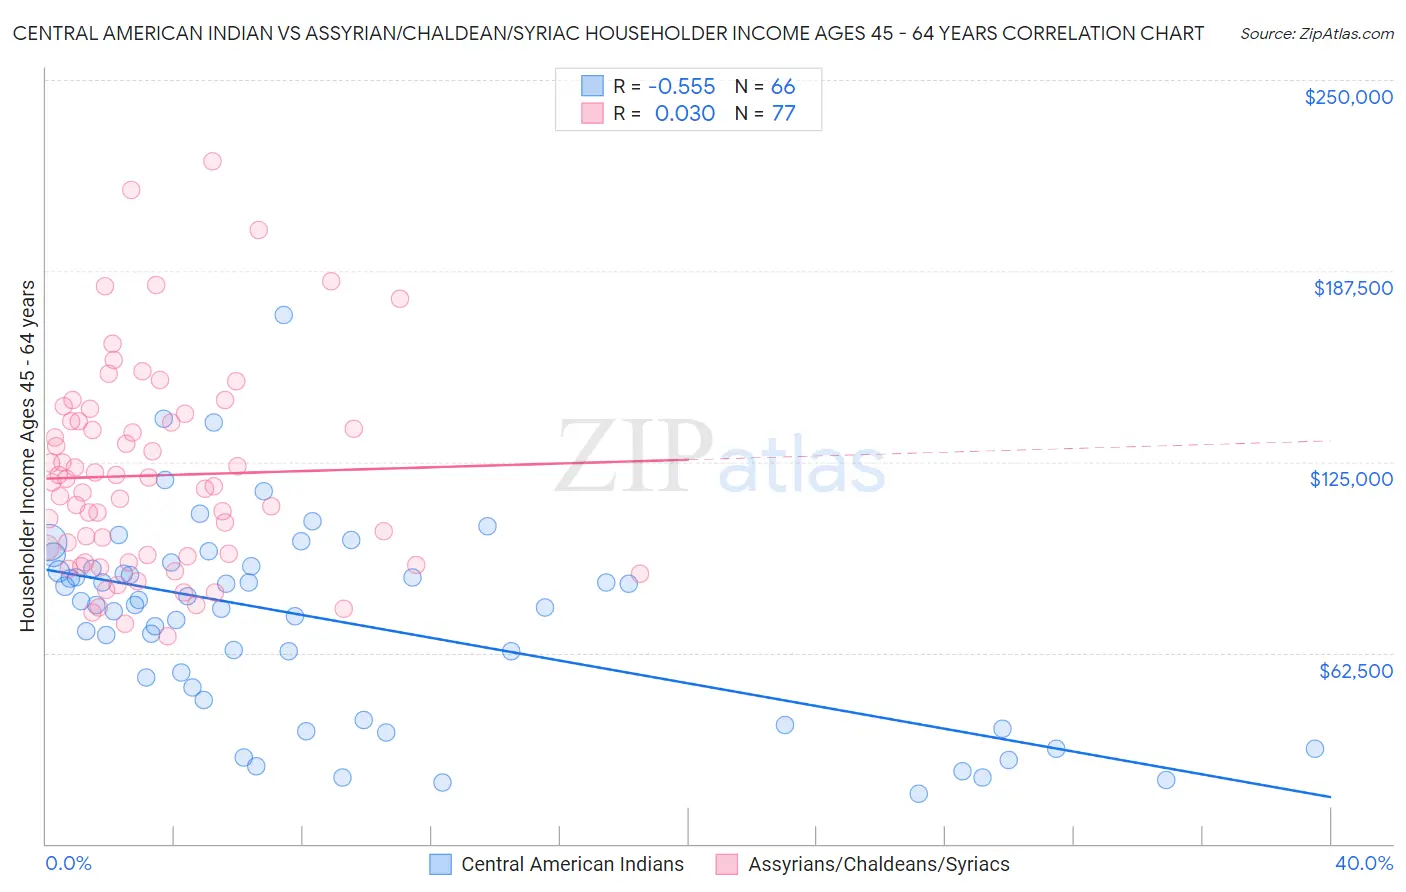 Central American Indian vs Assyrian/Chaldean/Syriac Householder Income Ages 45 - 64 years